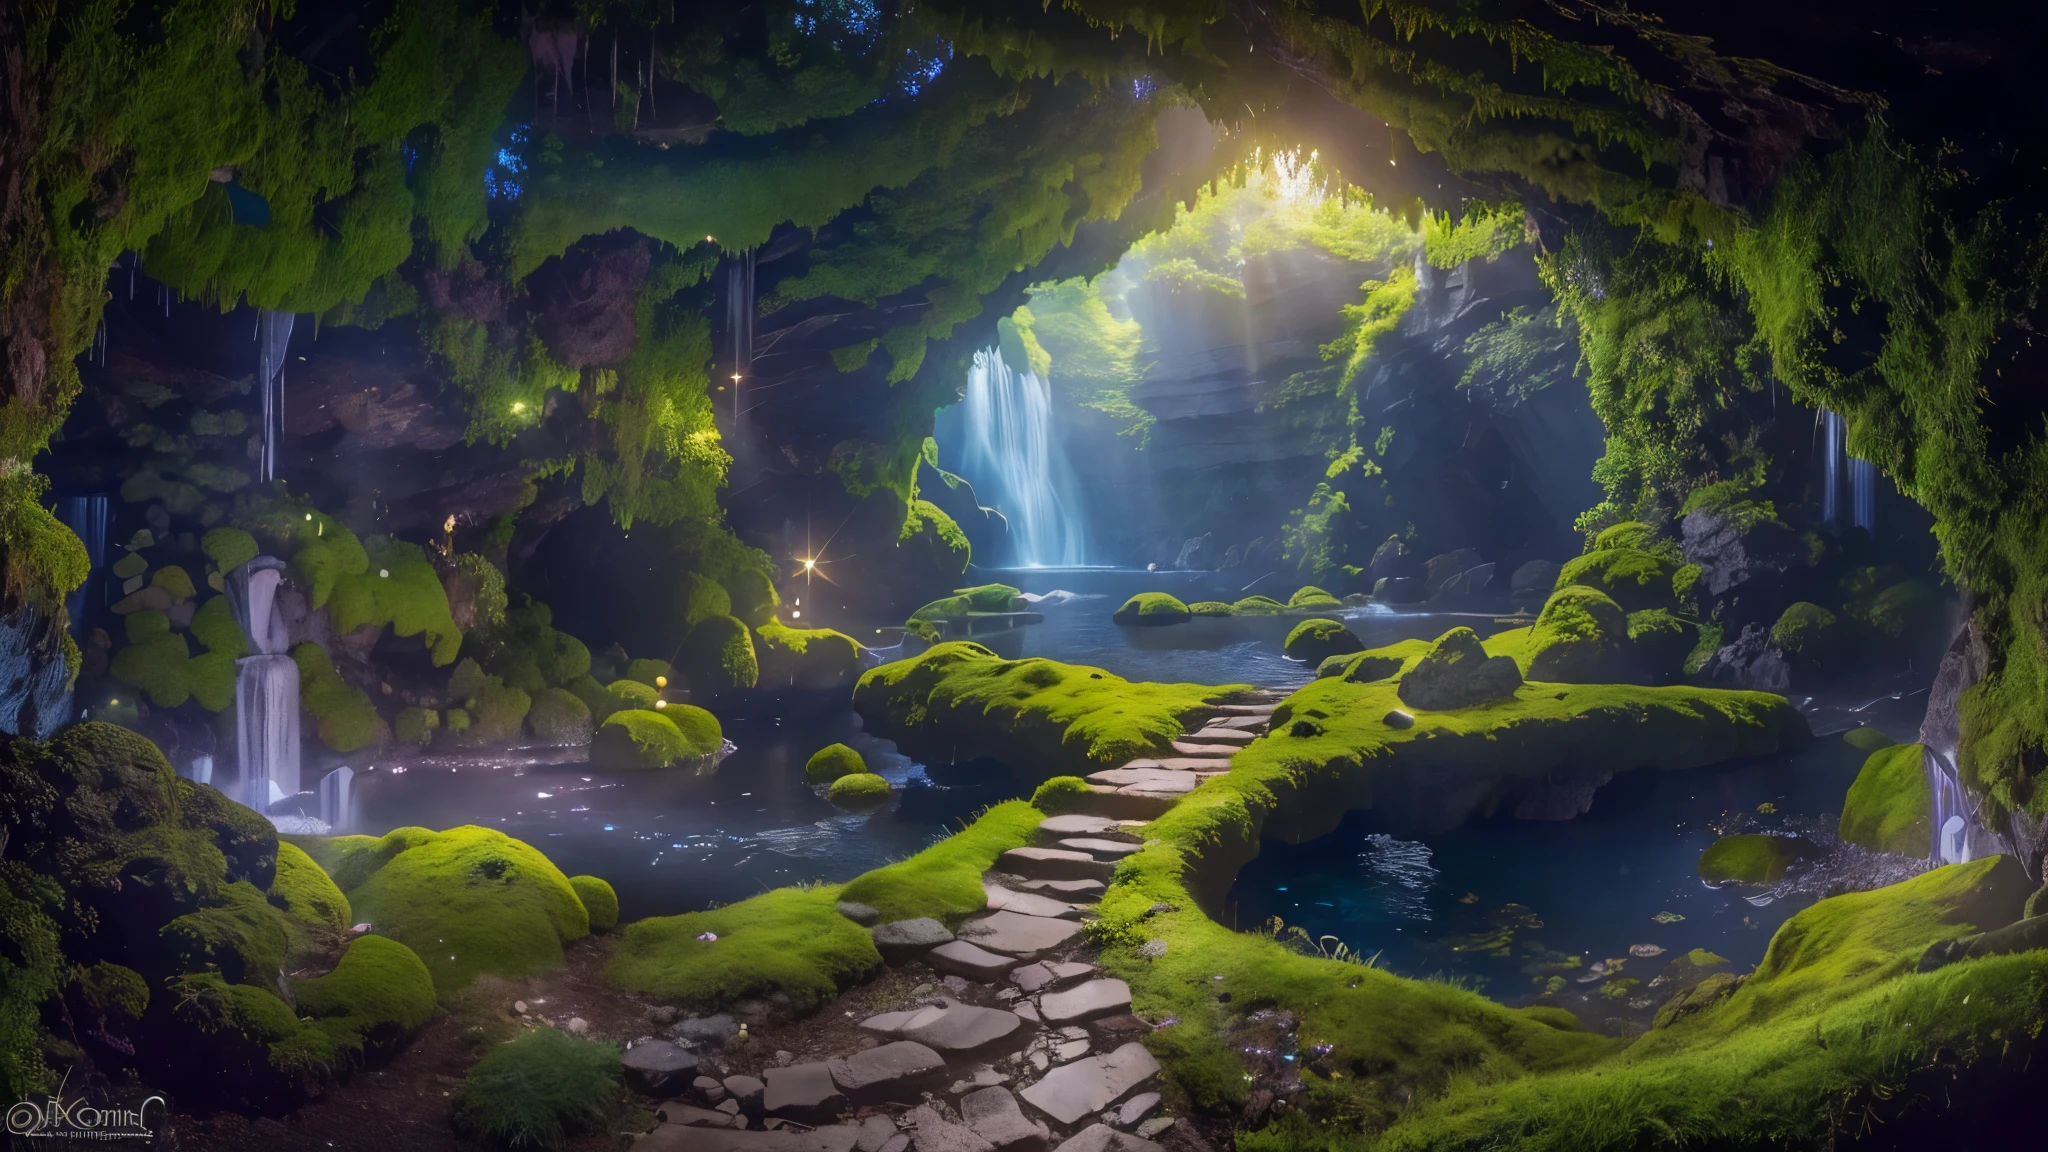 (best quality,8k,panoramic view,masterpiece:1.2),magical mines,enchanted cave,shining gems,mystical atmosphere,sparkling crystals,illuminated pathway,jewel-toned hues,dreamy ambiance,ethereal glow,whimsical cavern,mysterious shadows,glowing moss,enchanted waterfall,twinkling stars,hidden treasures,stunning rock formations,ethereal light beams,otherworldly landscapes,intricate details,fantastical underground world,spellbinding beauty,fairy tale realm,timeless masterpiece.